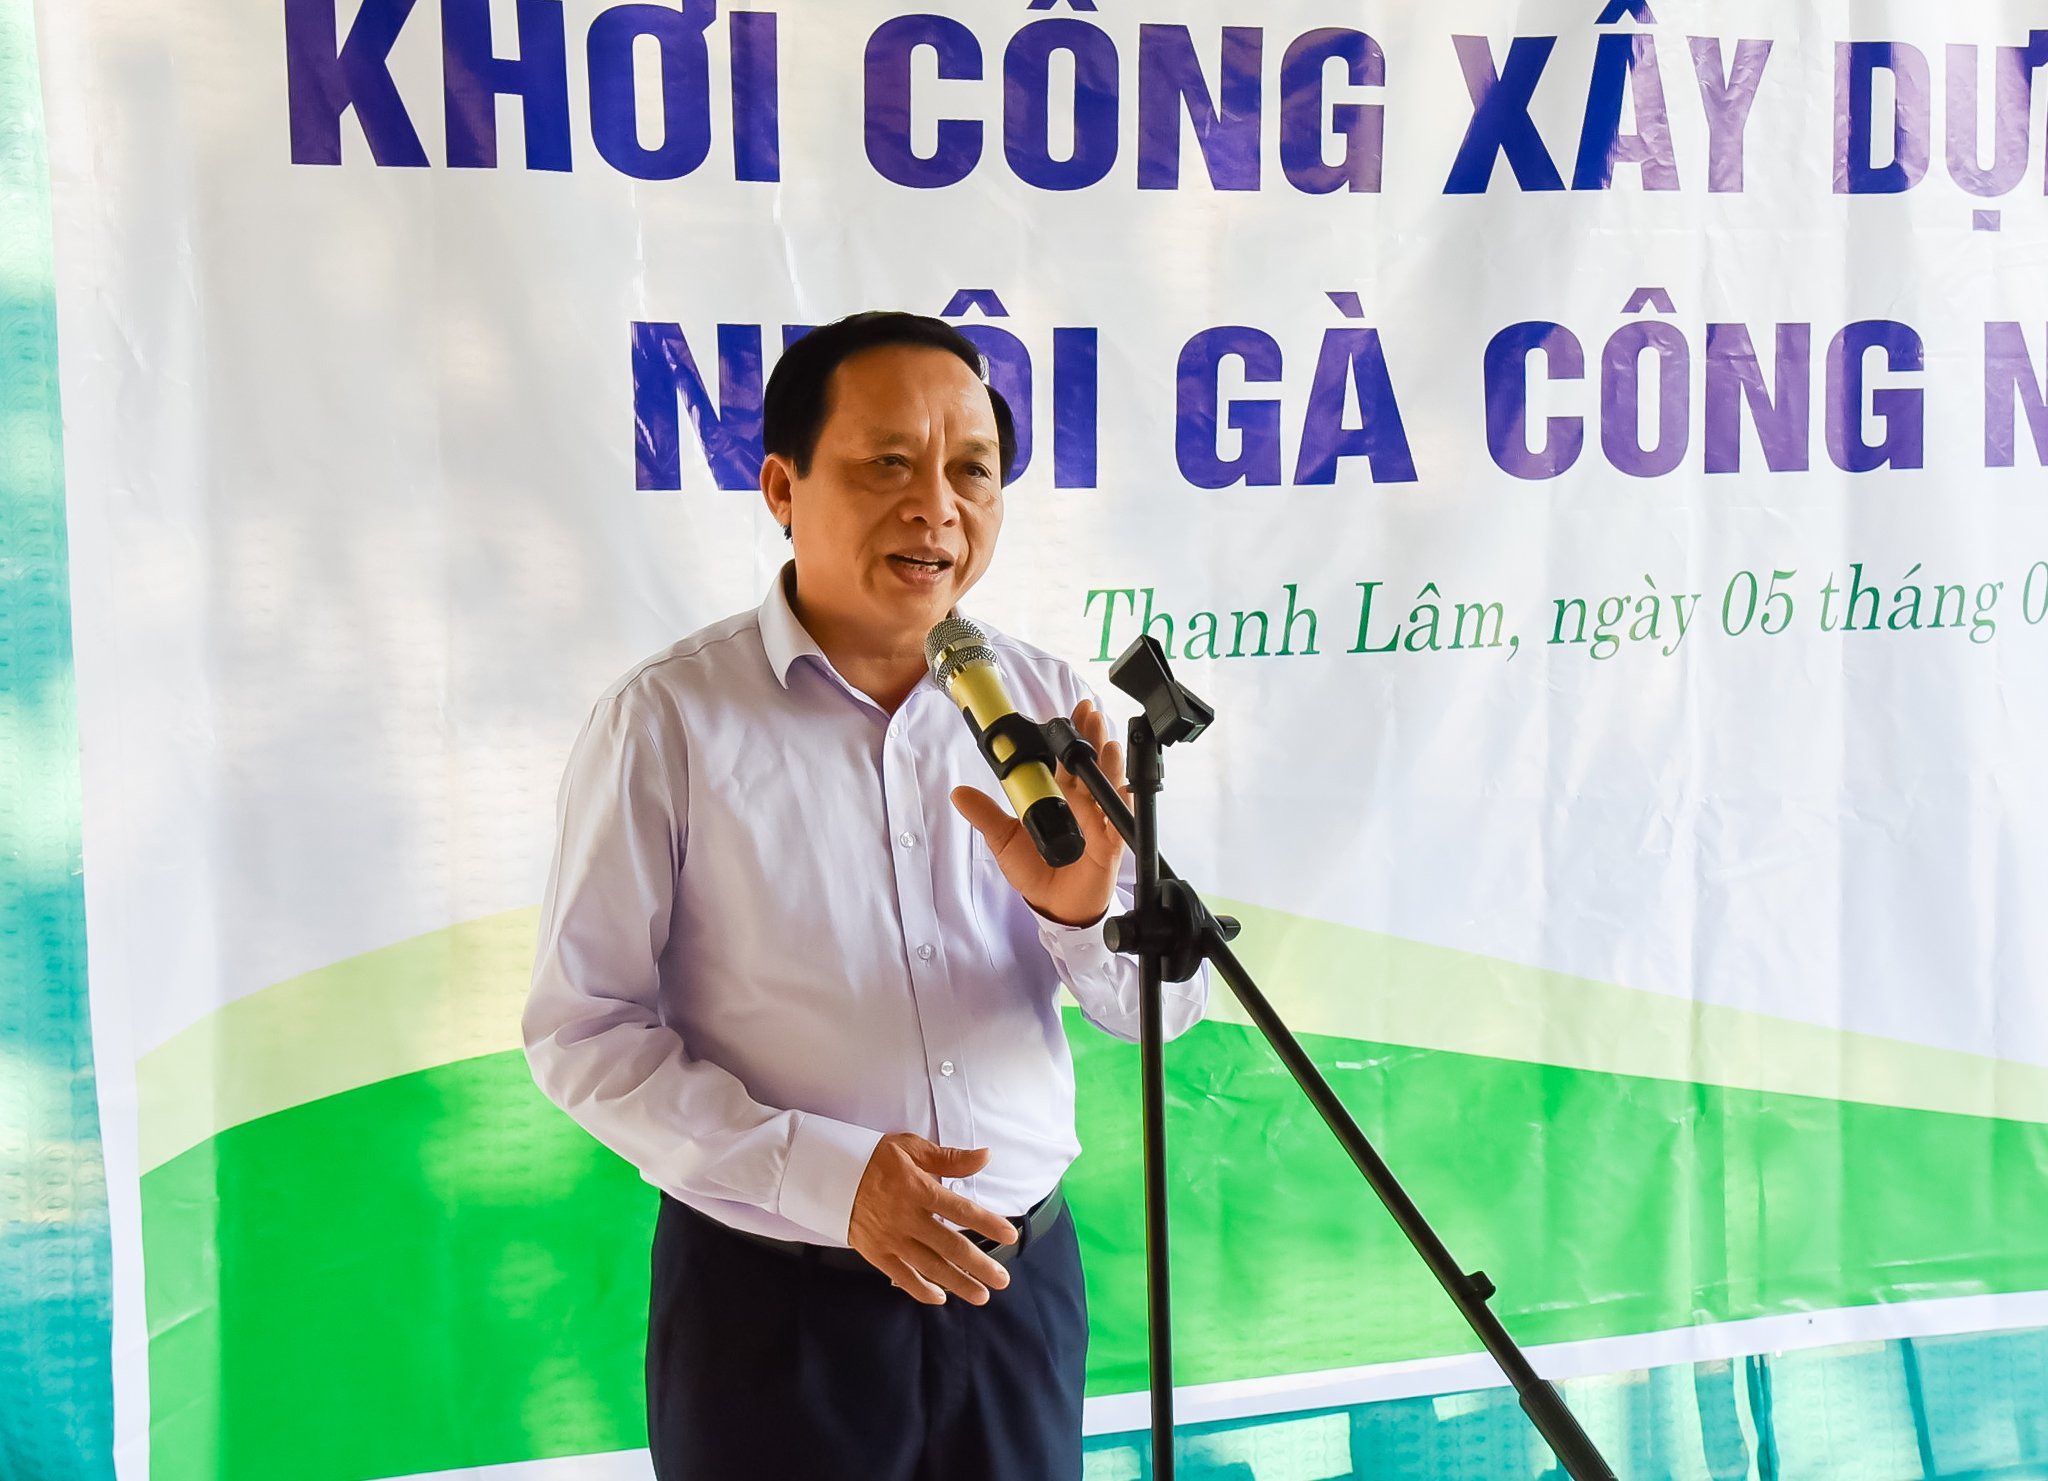 bna-anh-tung-anh-thanh-le-5471.jpg